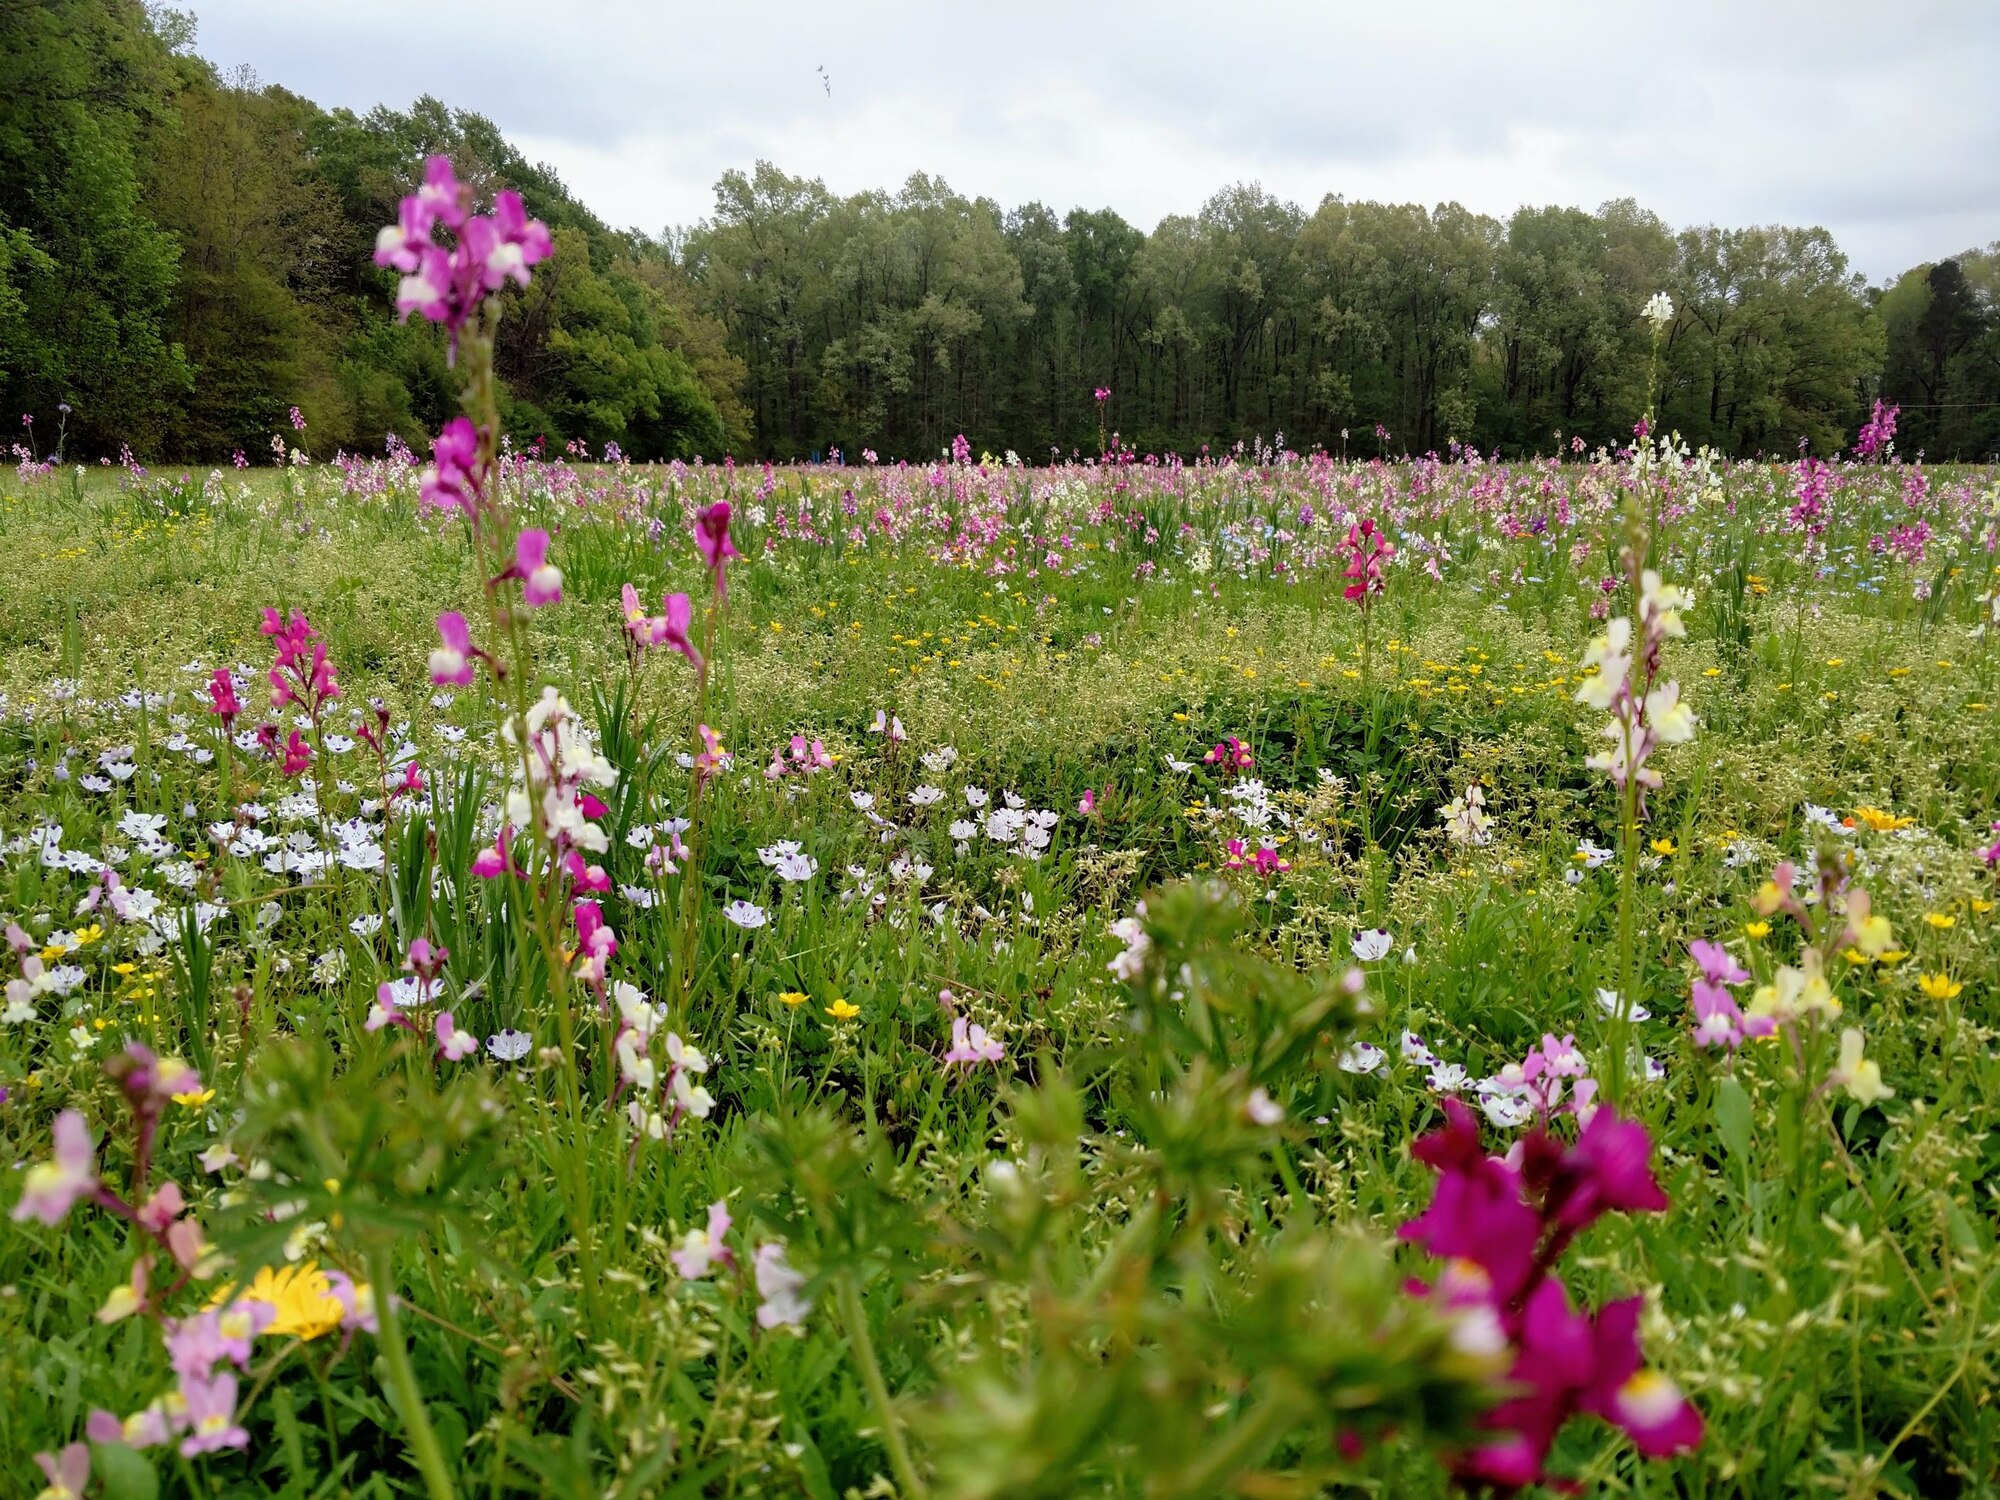 Wildflower field on East Reservation planted by Barksdale Natural Resources – taken by Kate Hasapes (2018)